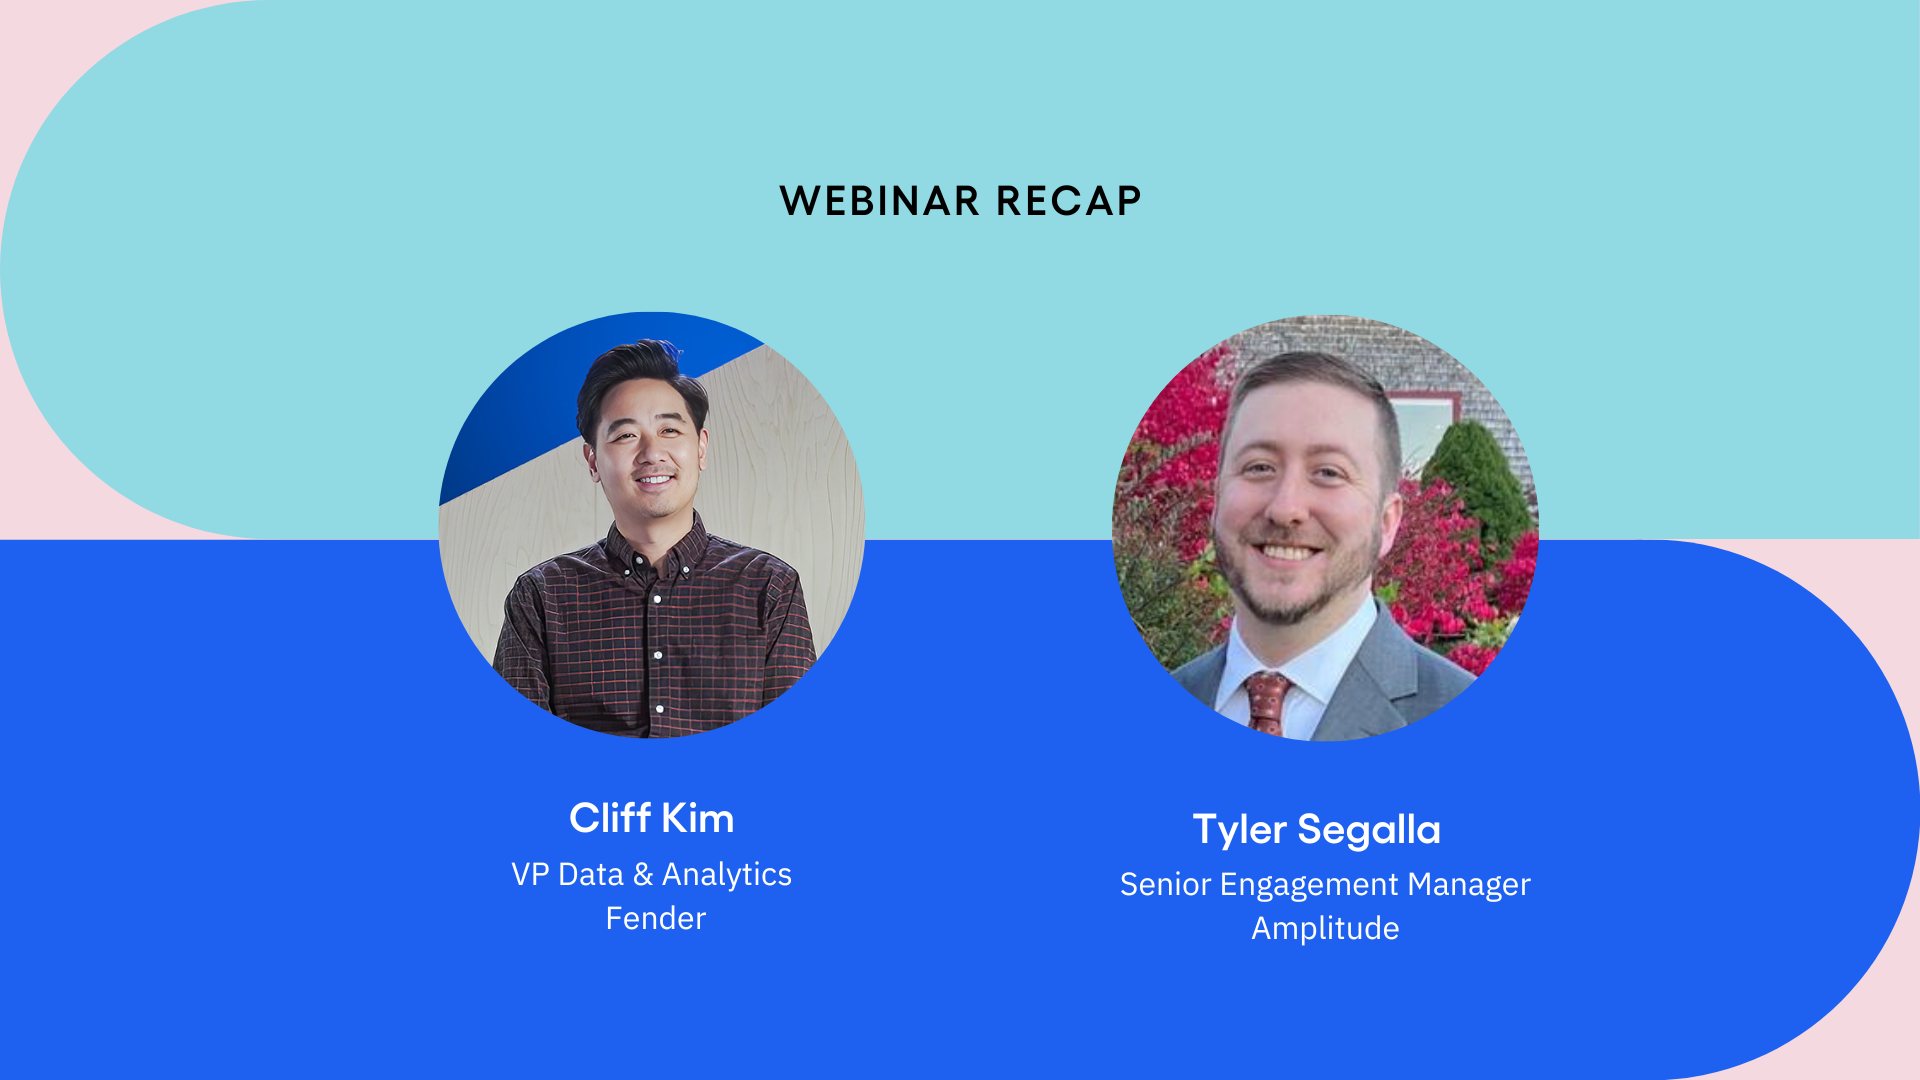 Image of Cliff Kim, VP Data & Analytics at Fender and Tyler Segalla, Senior Engagement Manager at Amplitude on a blue background